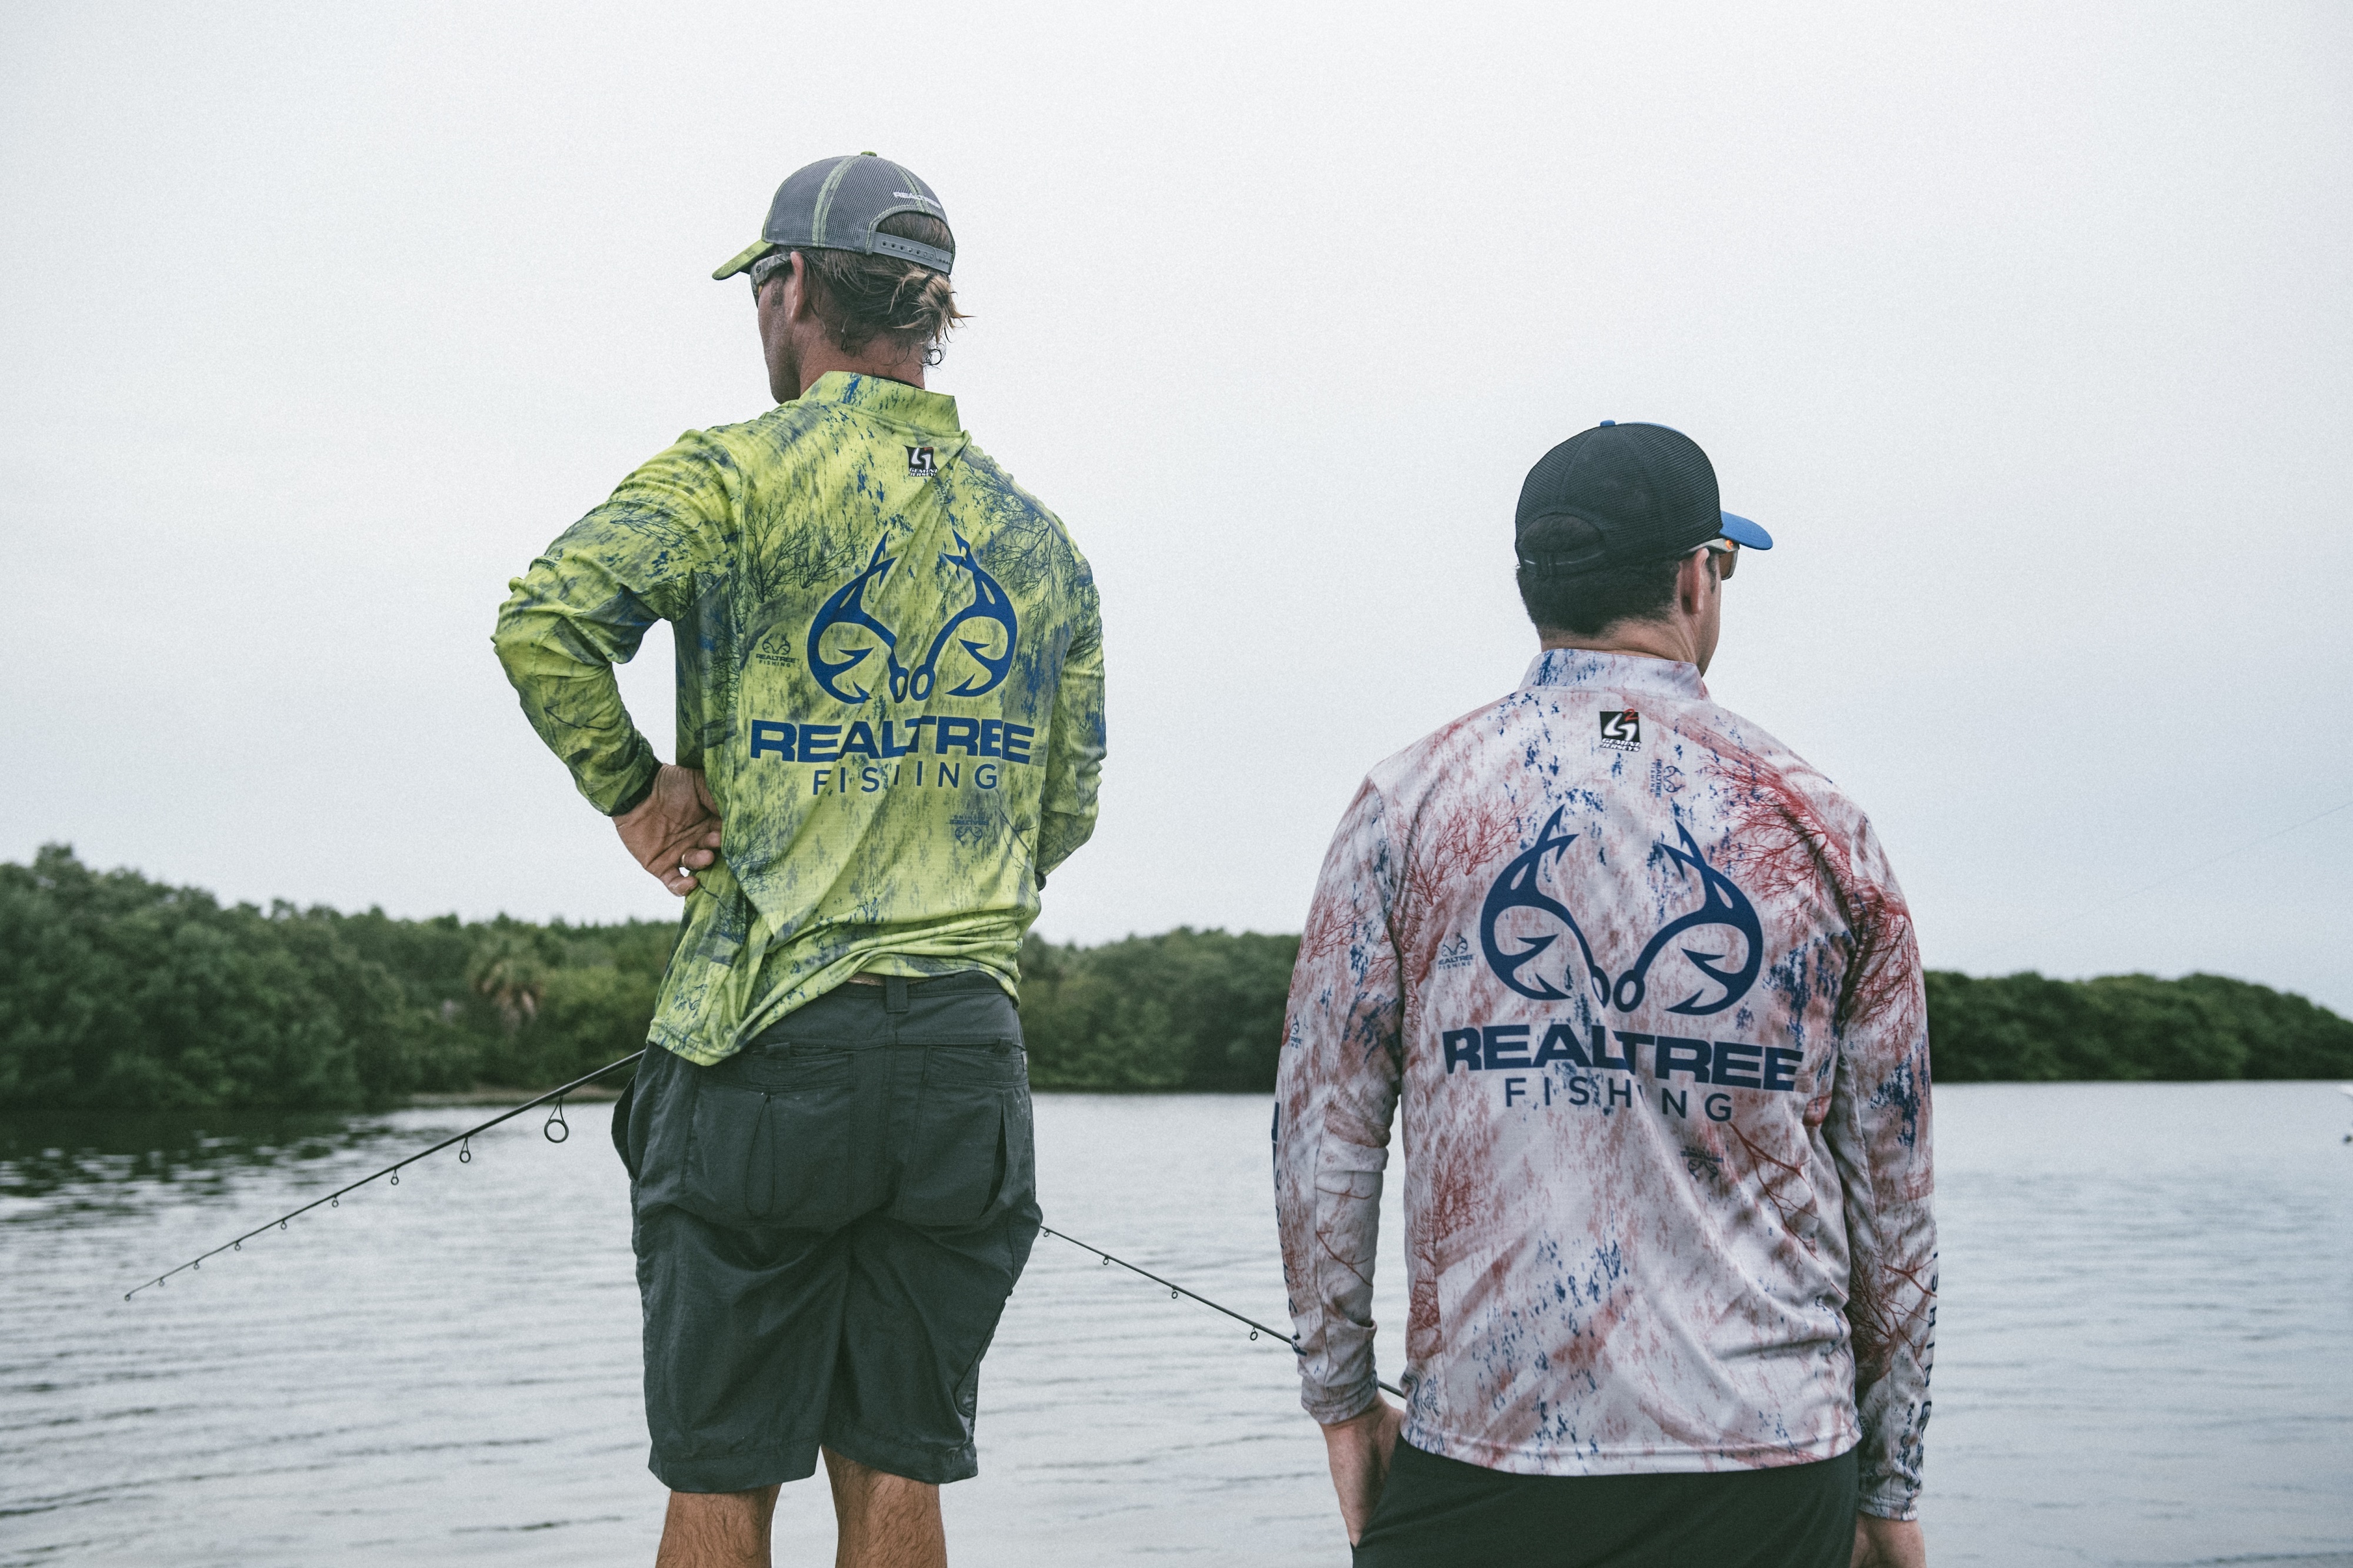 Realtree to Introduce Realtree Fishing Pattern — The Hunting page